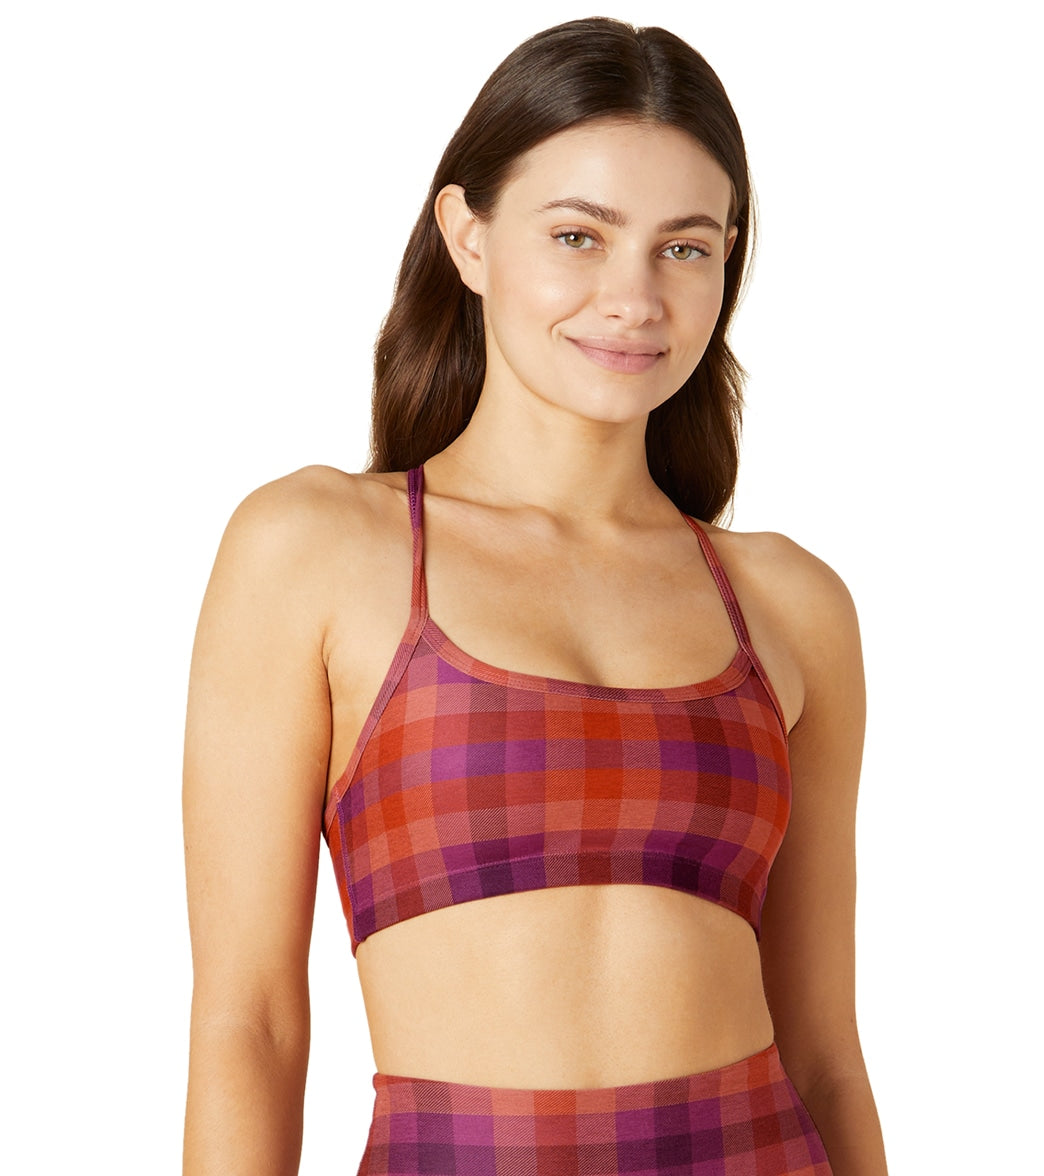 Beyond Yoga Sports Bra Size XS - $29 New With Tags - From Isabella